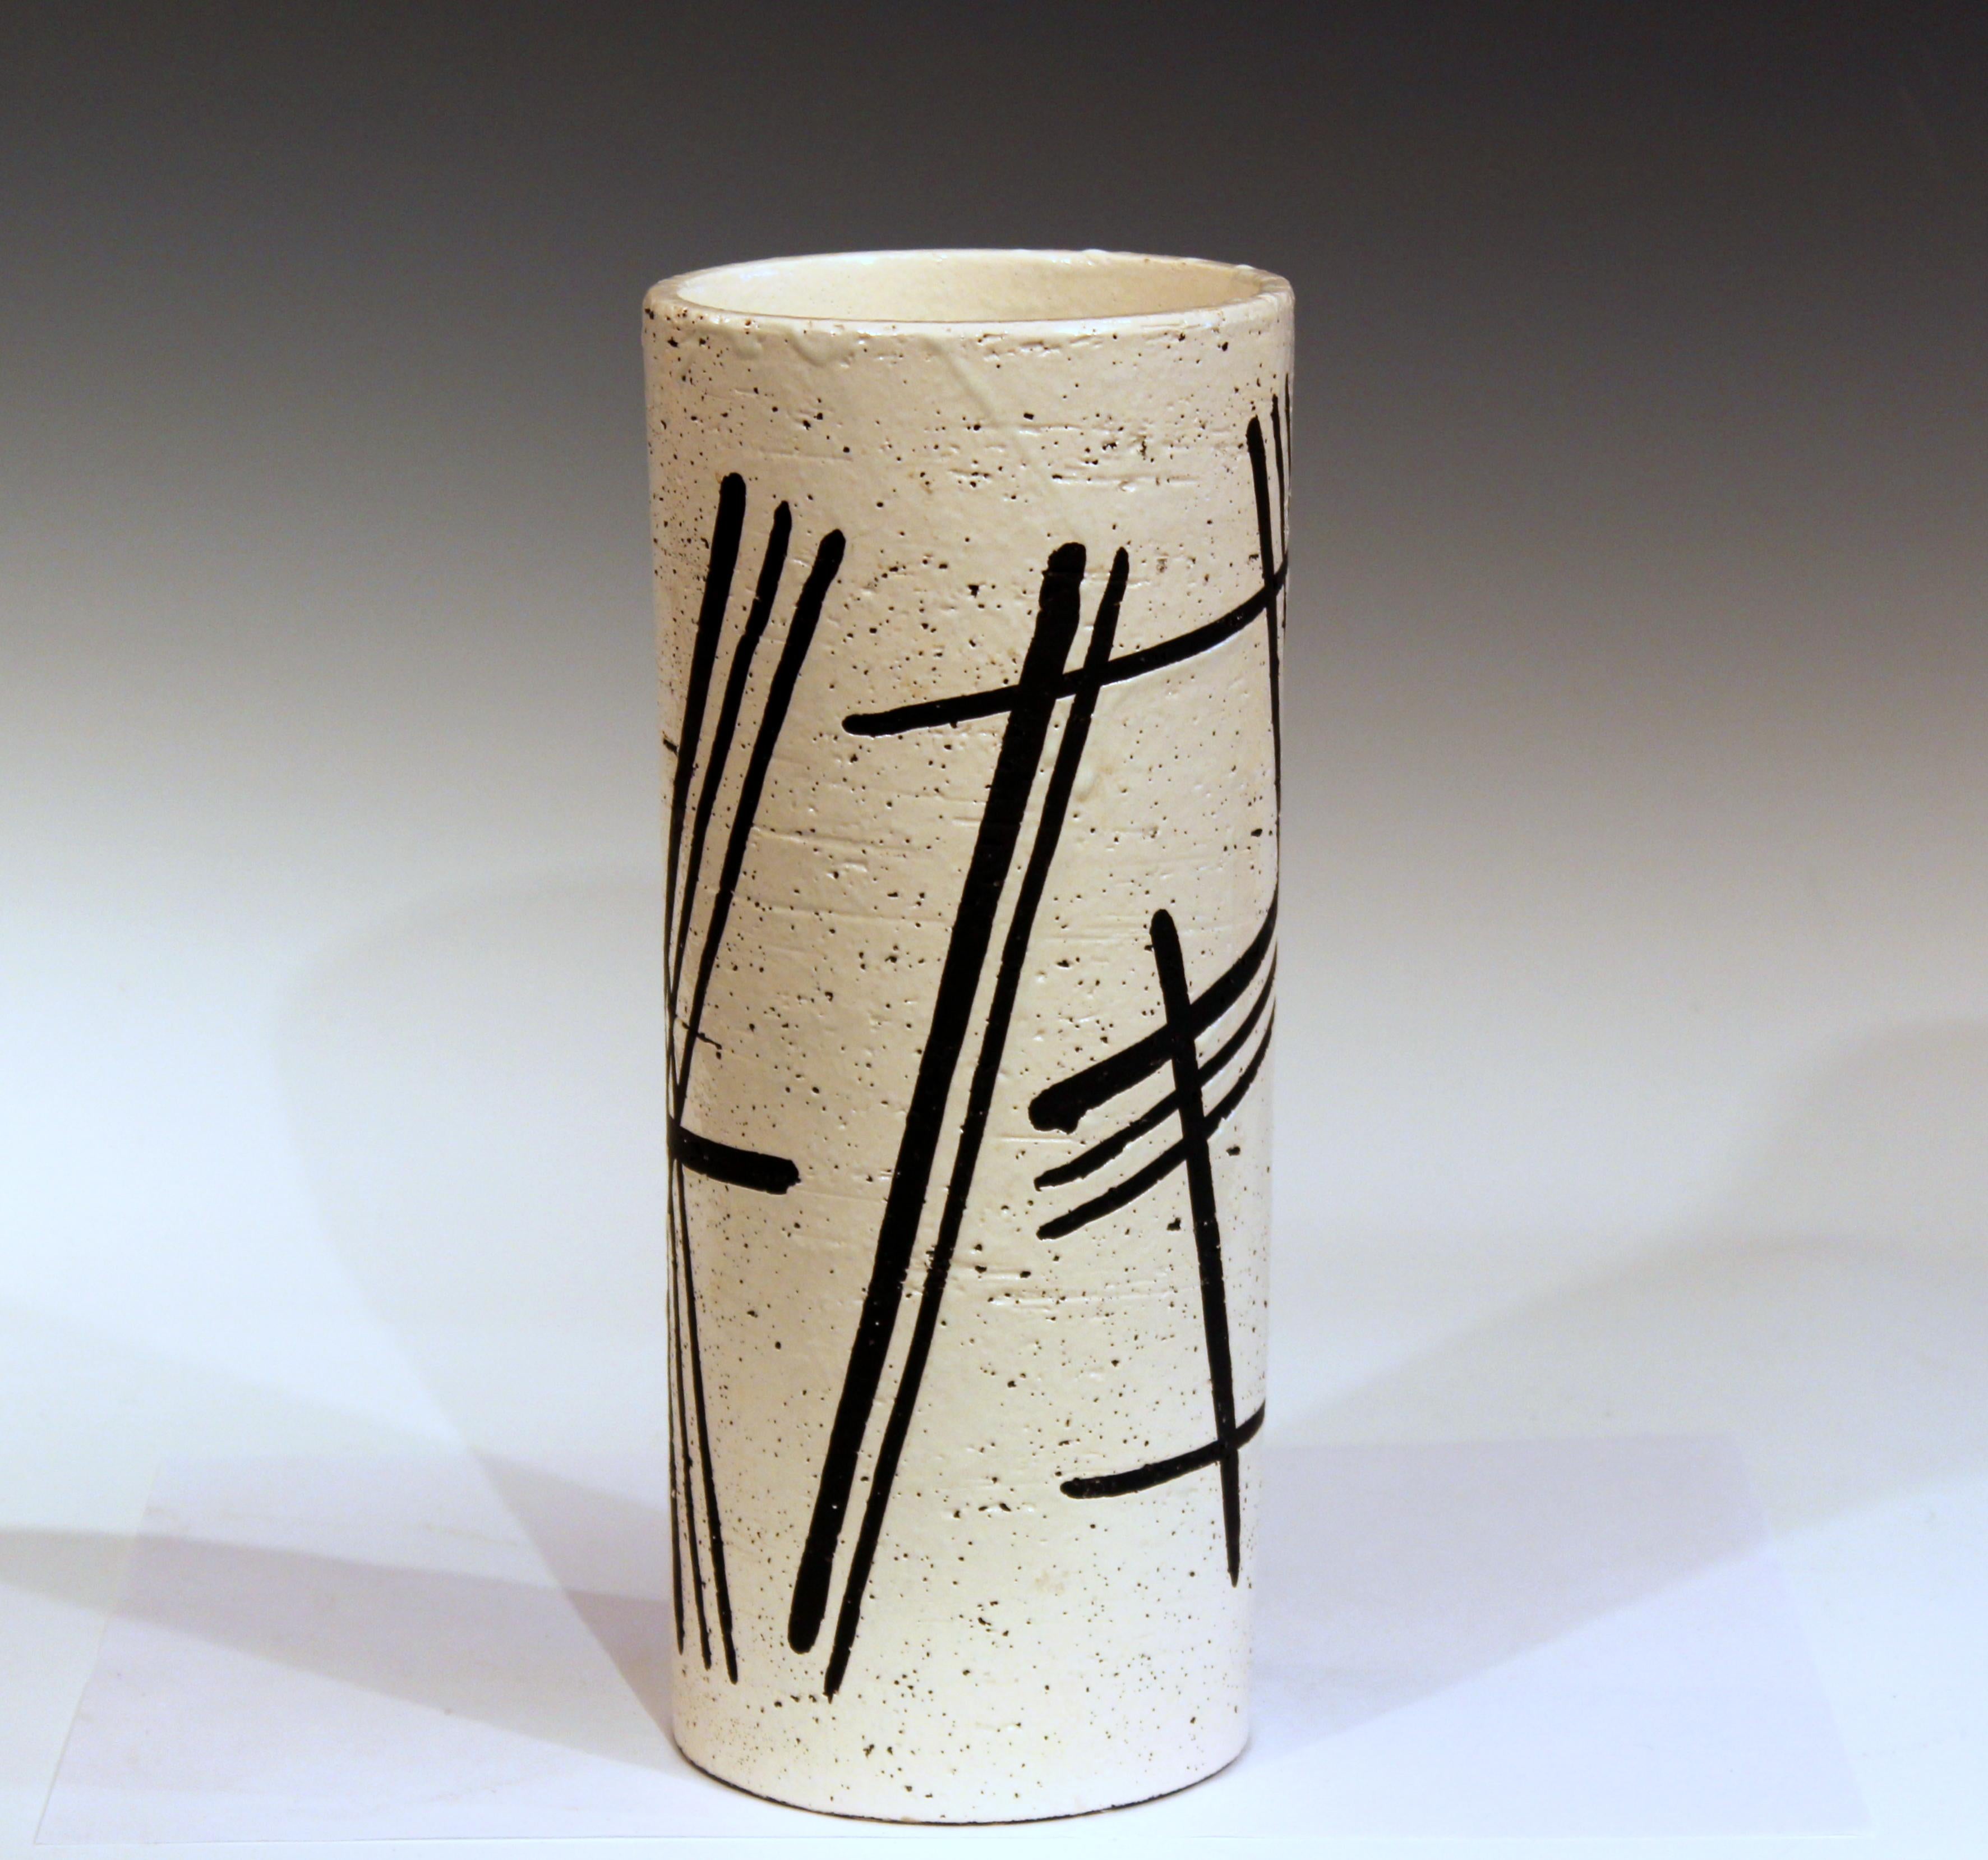 Bitossi vase in black and white abstracted chopsticks decor, circa 1960s. 12 3/8